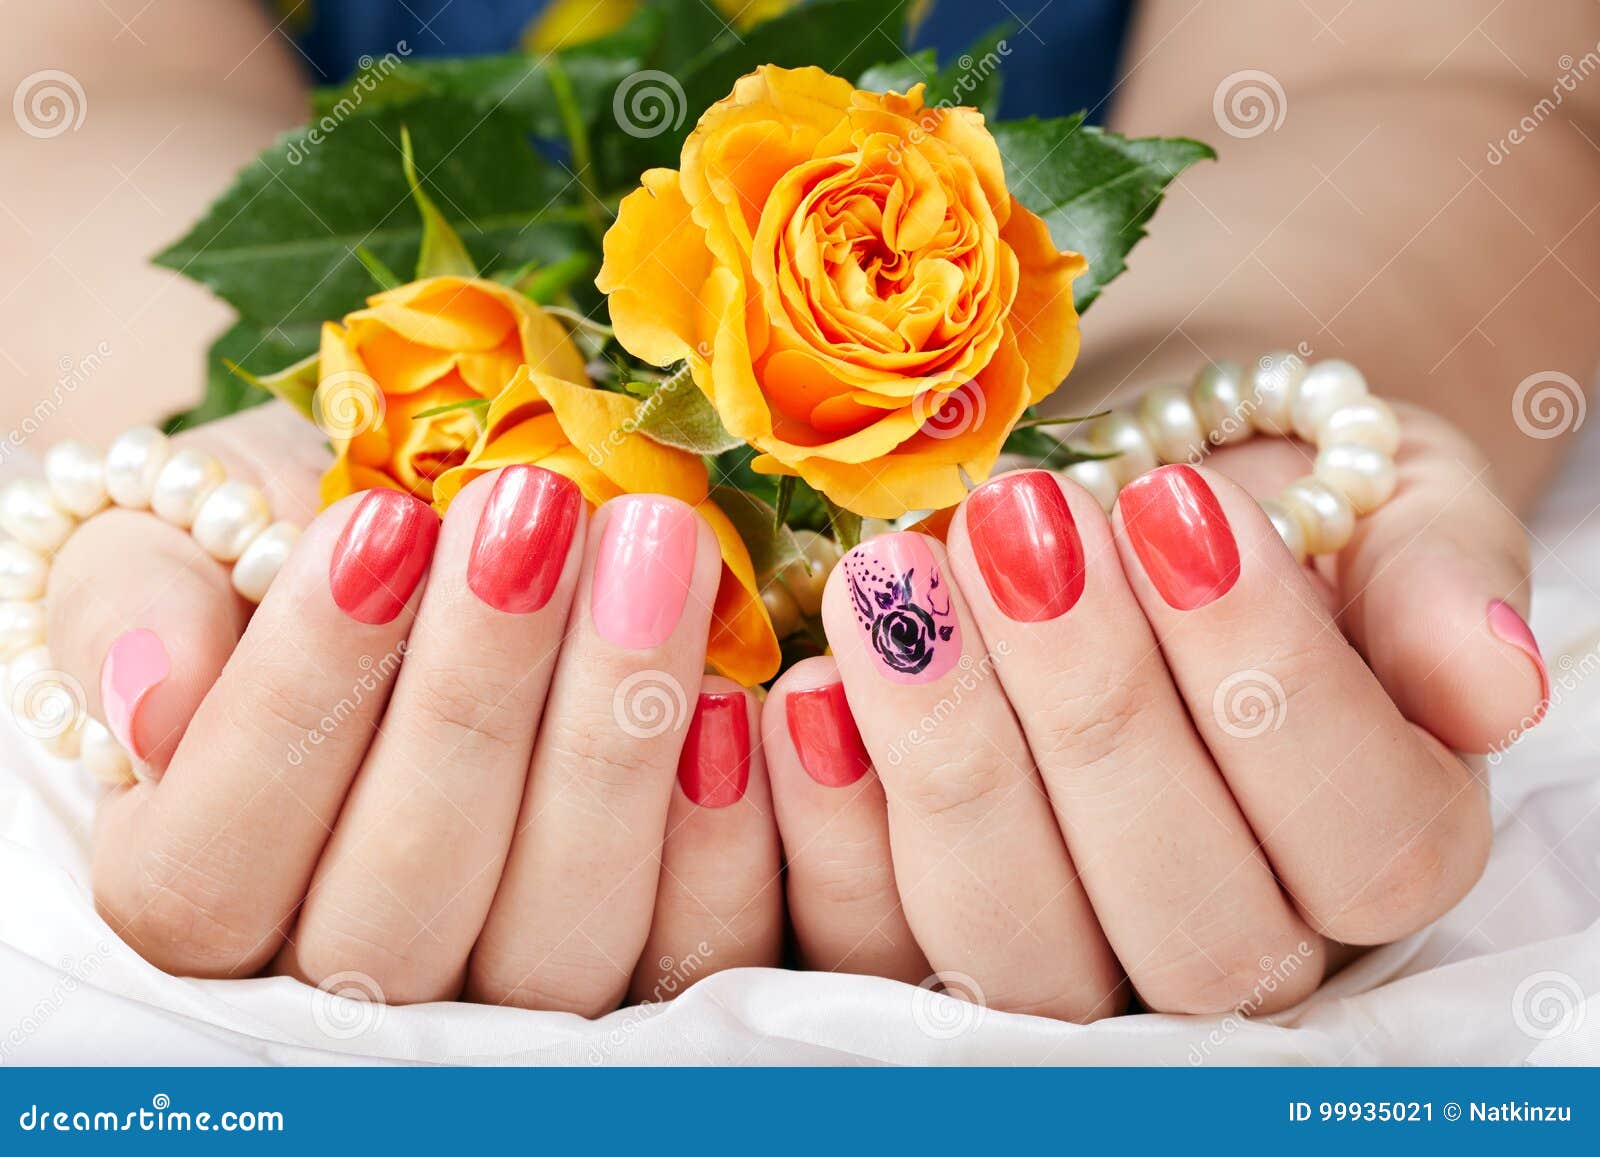 7. "Pretty Floral Nail Colors for Long Nails" - wide 2